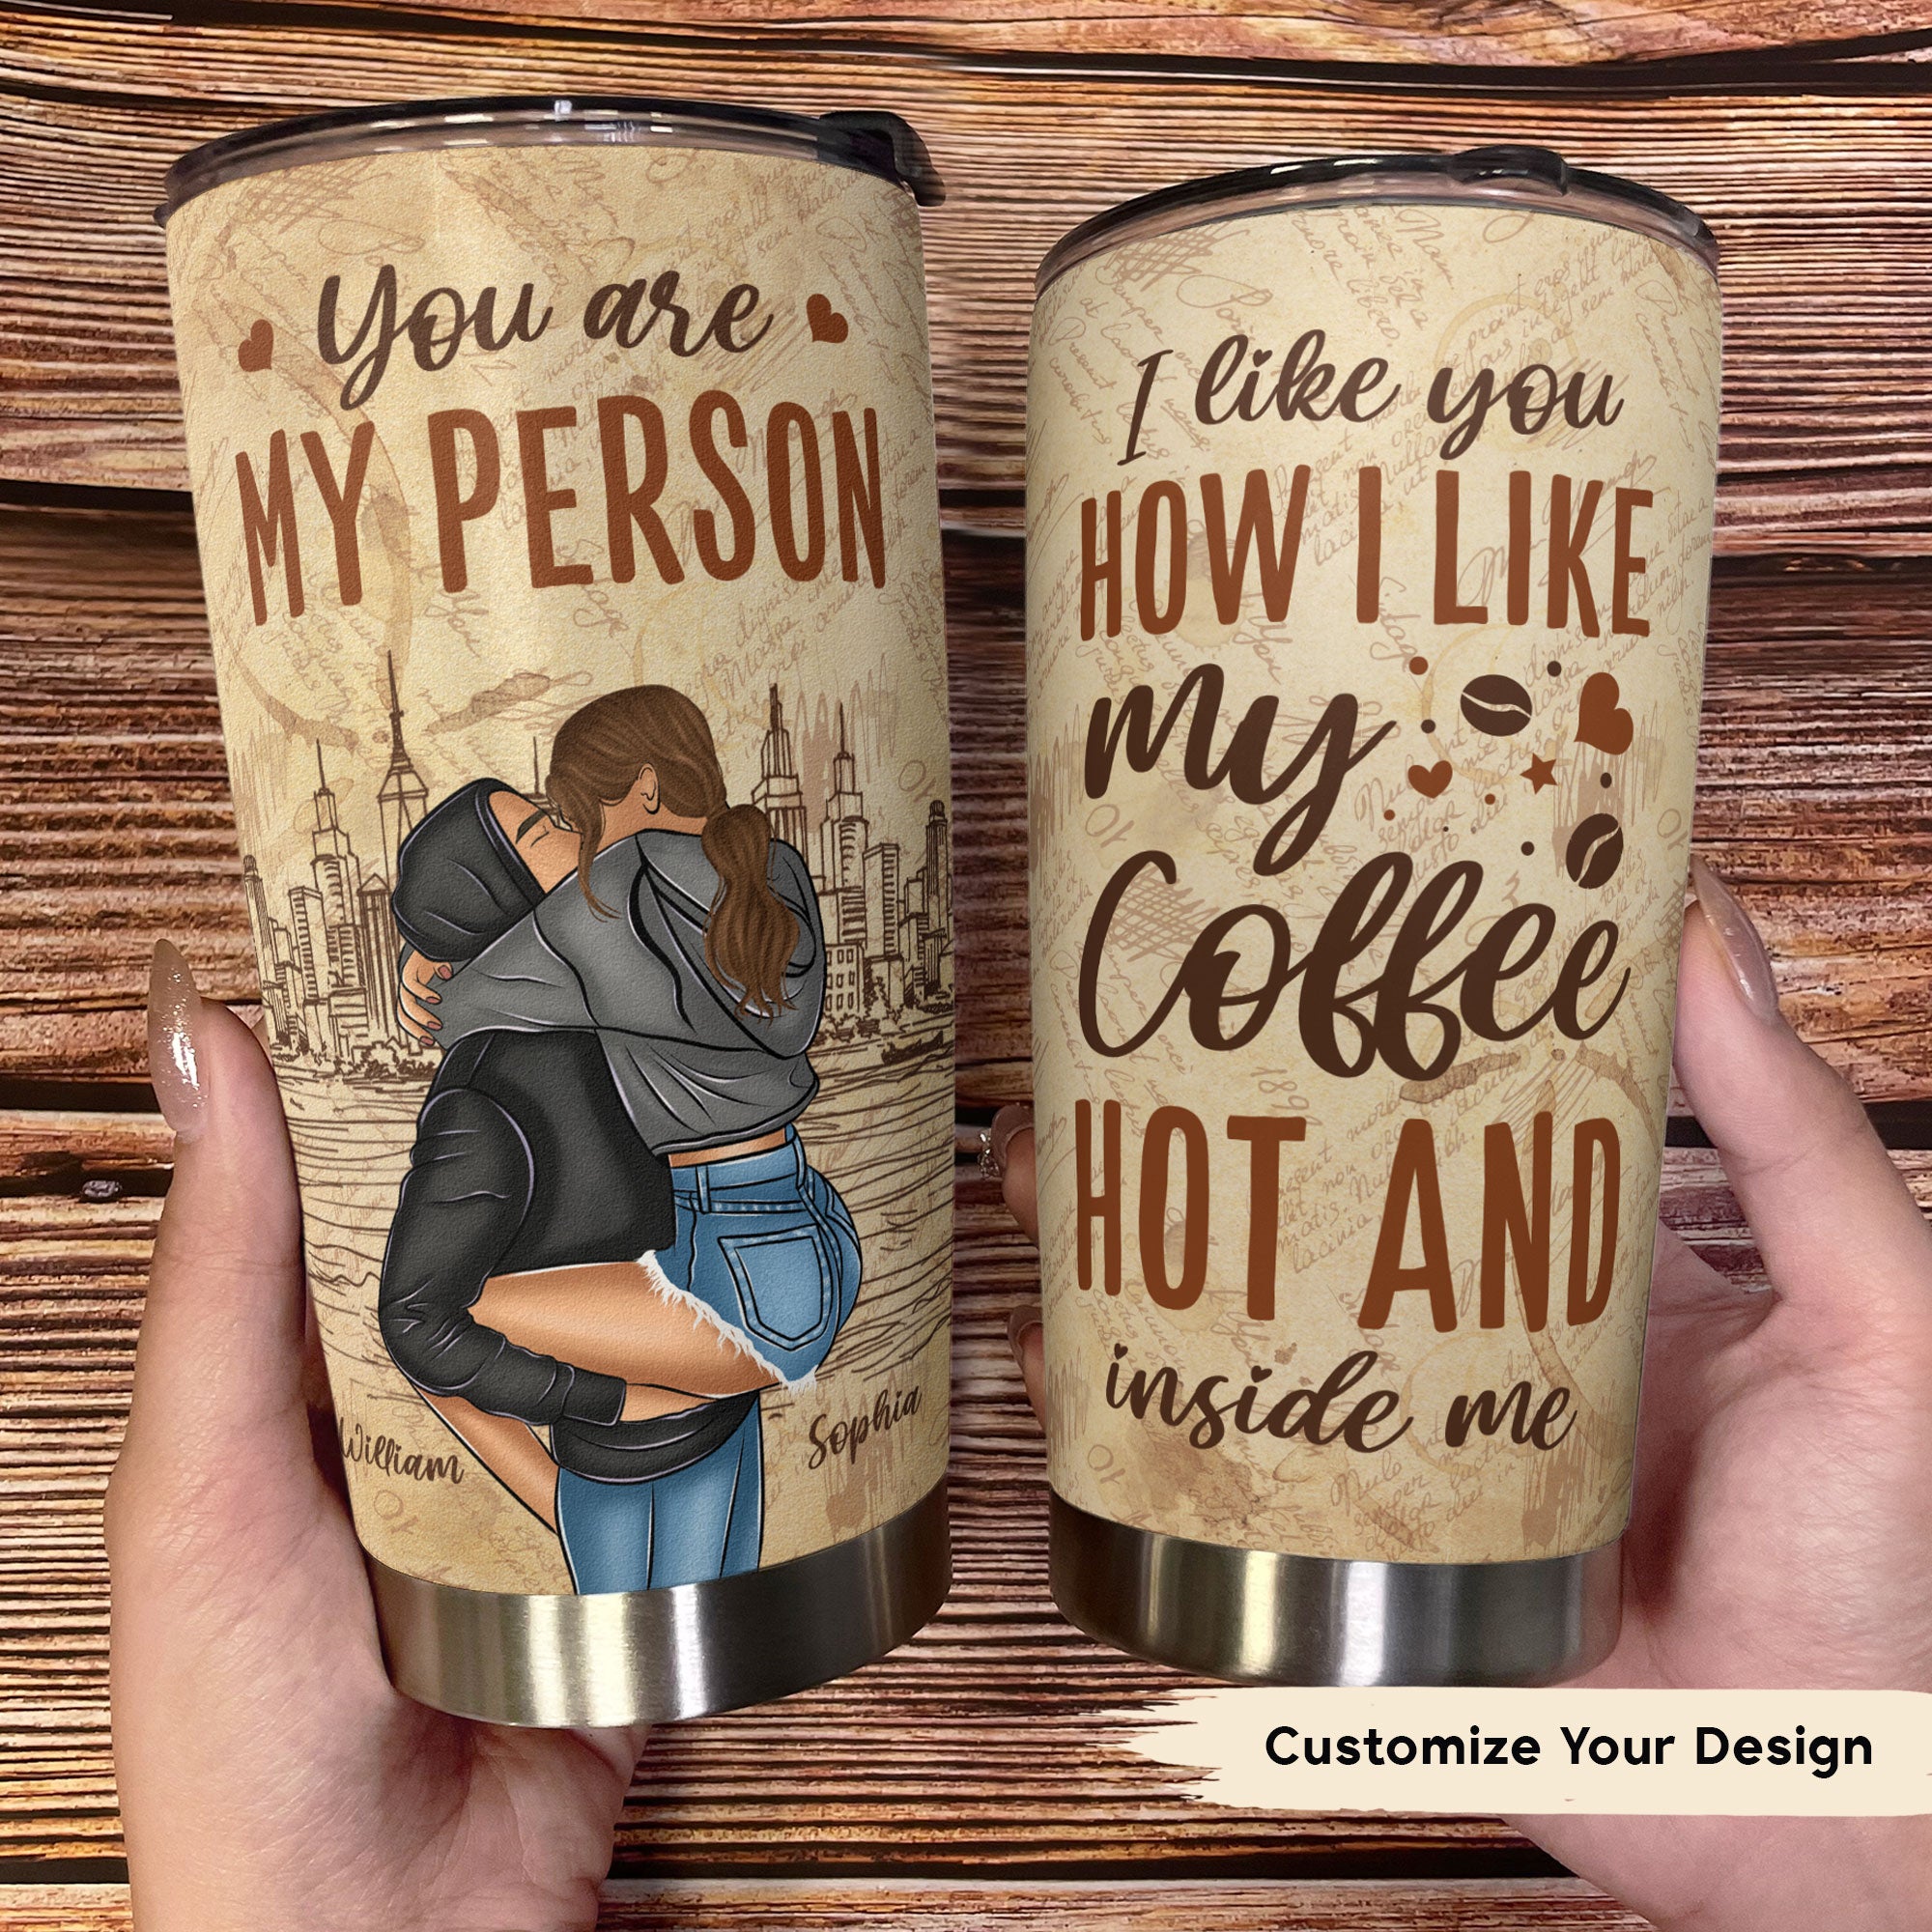 I Like You How I Like My Coffee, Hot And Inside Me - Personalized Tumbler  Cup